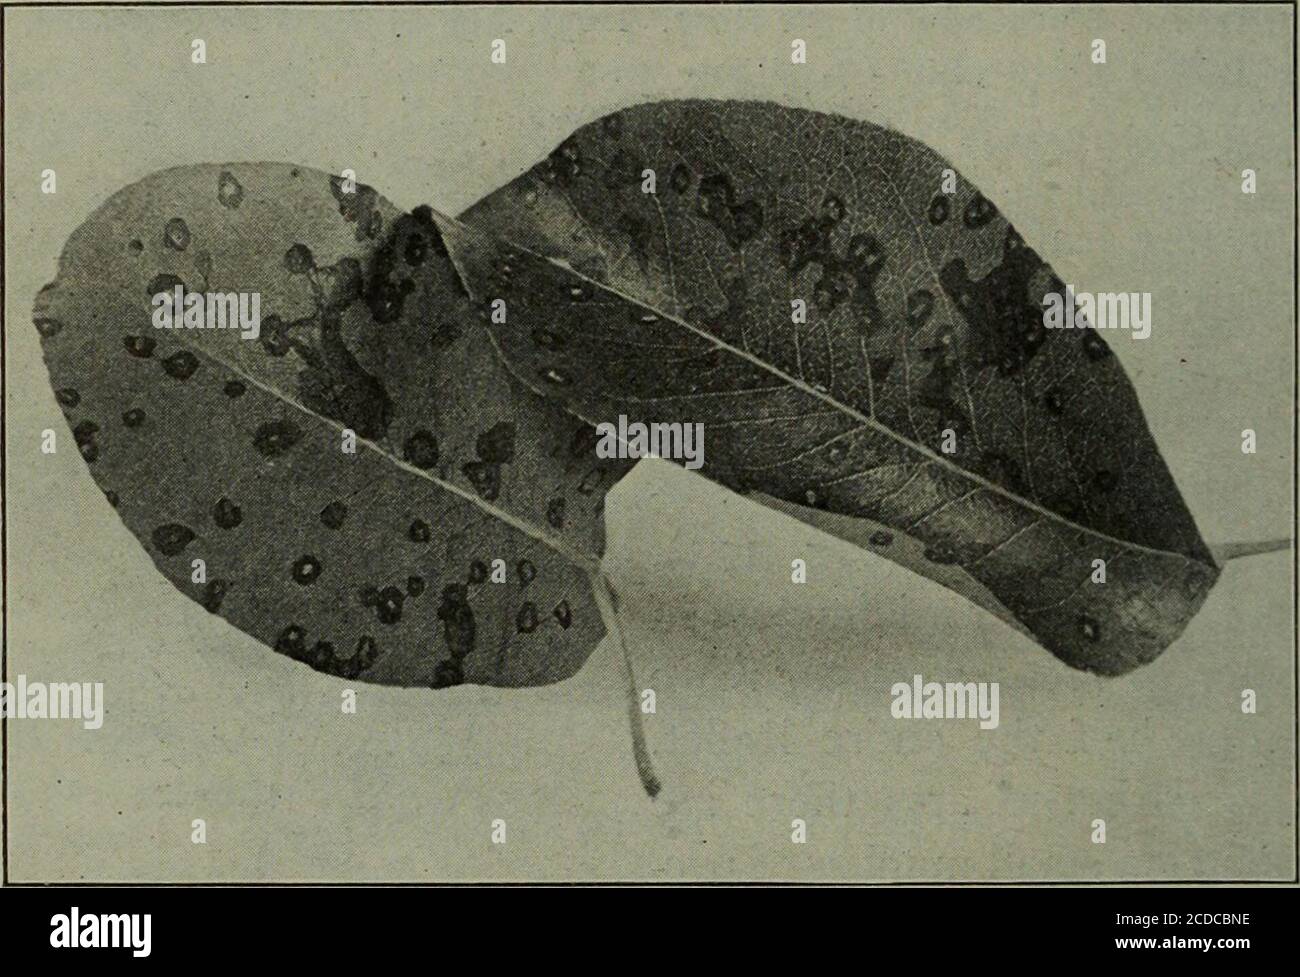 . Fungous diseases of plants, with chapters on physiology, culture methods and technique . Fig. 175. Leaf Blotch of Rose 358 FUNGOUS DISEASES OF PLANTS XLIX. LEAF SPOT OF THE PEAR Septoria Pyricola Desm. DuGGAR, B, M. Some Important Pear Diseases. Leaf Spot. Cornell Agl.Exp. Sta. Built. 145: 597-611. figs. 1^7-16^. 1898. The leaf spot of pear is a disease which may be readily dis-tinguished from the leaf blight subsequently described. It occursthroughout the eastern United States as an important fungus, both. Fig. 176. Leaf Spot of Pear in orchards and nurseries. It is probably found throughou Stock Photo